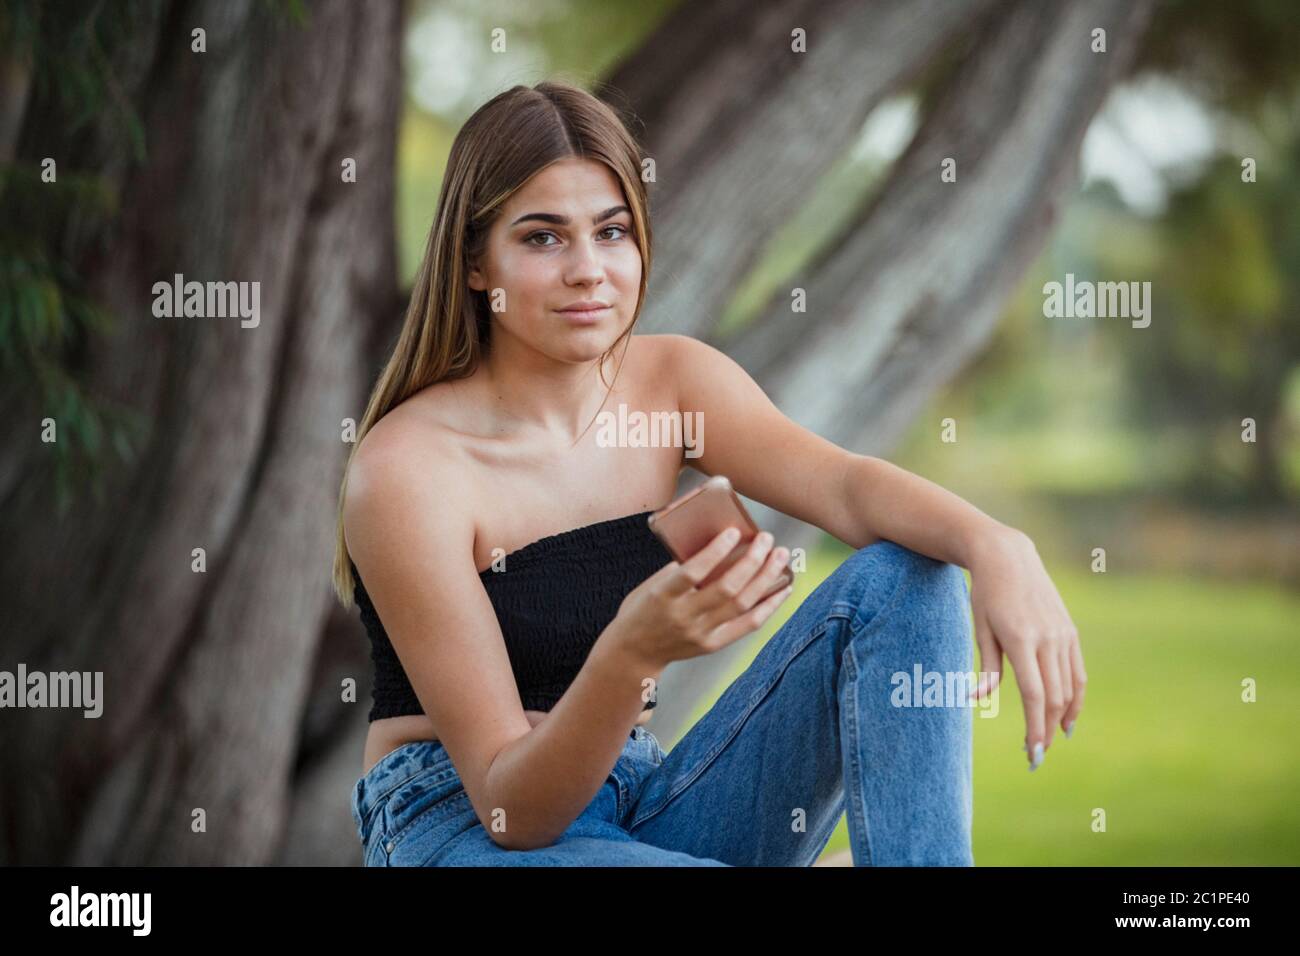 Teenage Girl Staying Connected Stock Photo